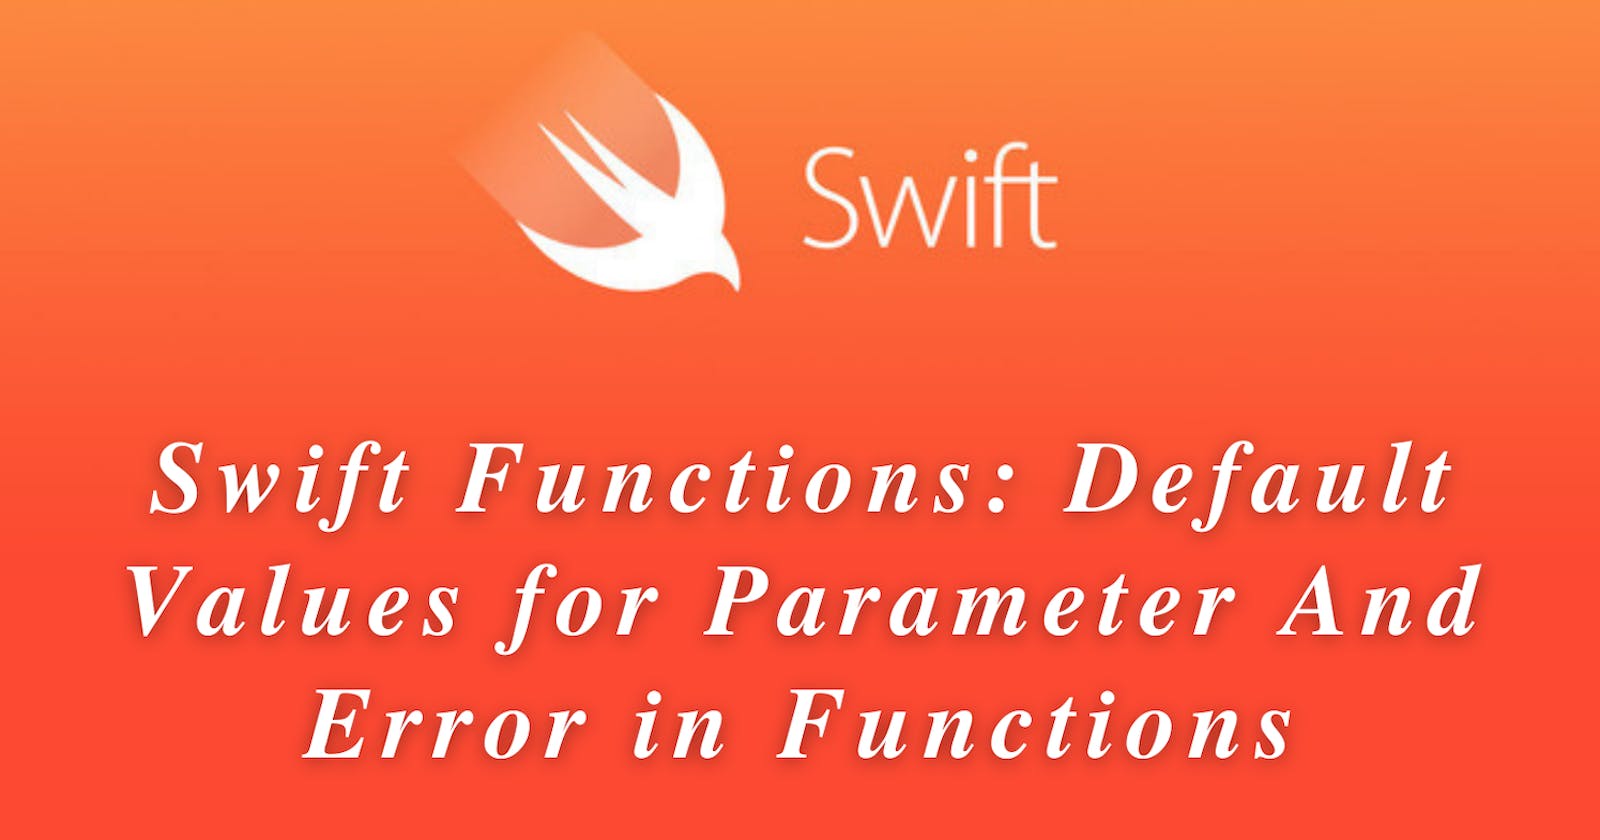 Swift Functions: Default Values for Parameter And Error in Functions